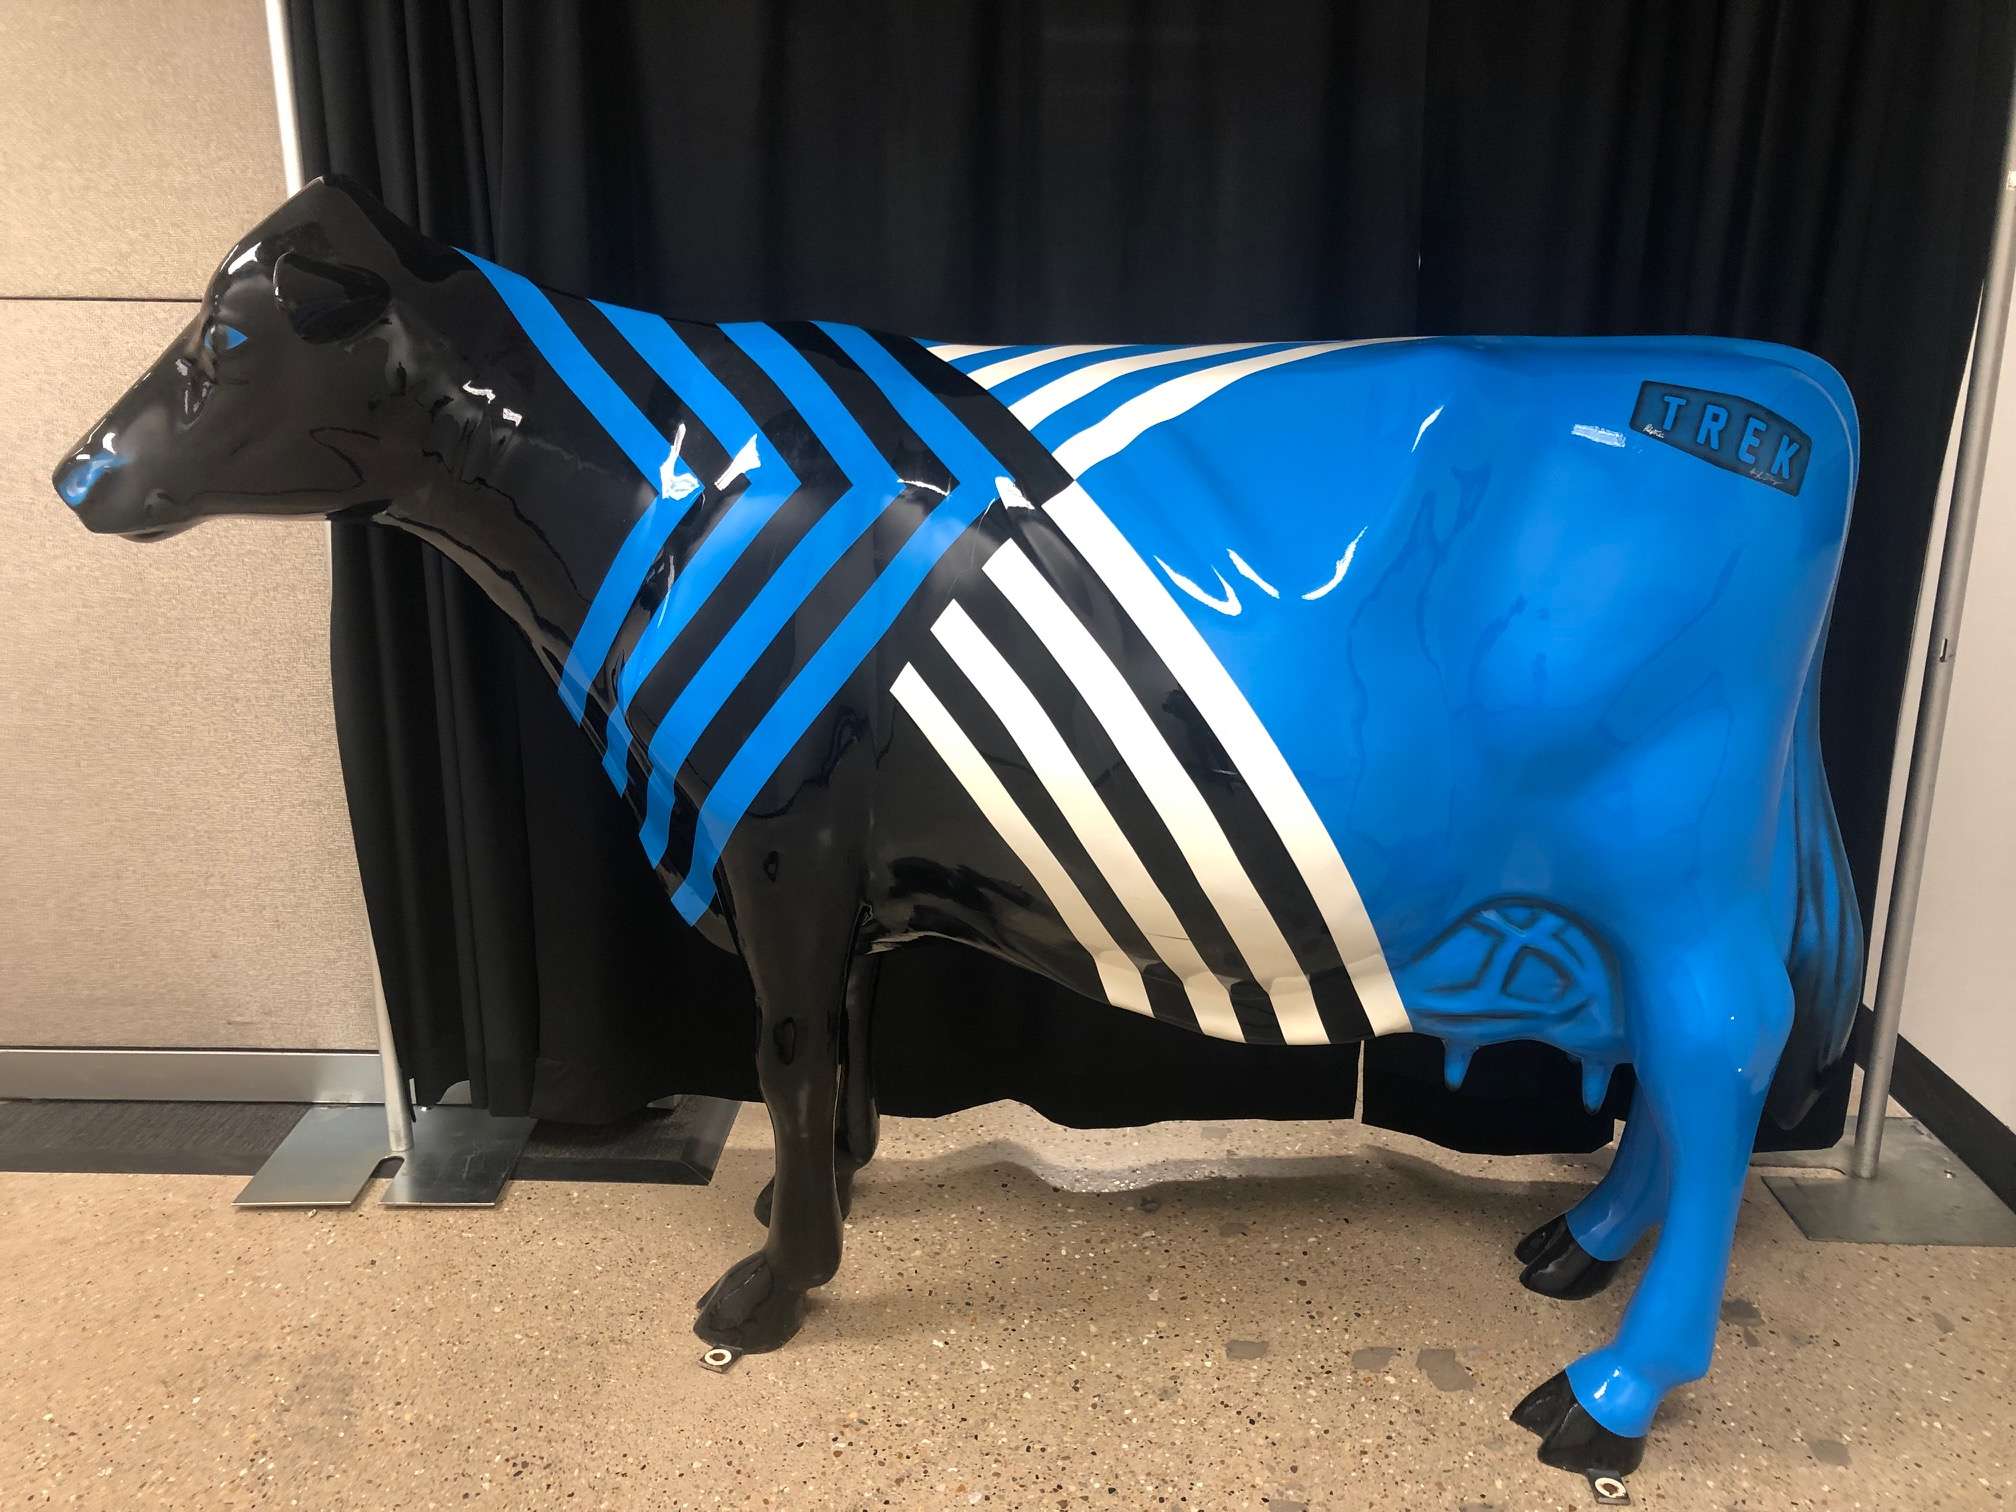 Black, blue and white cow